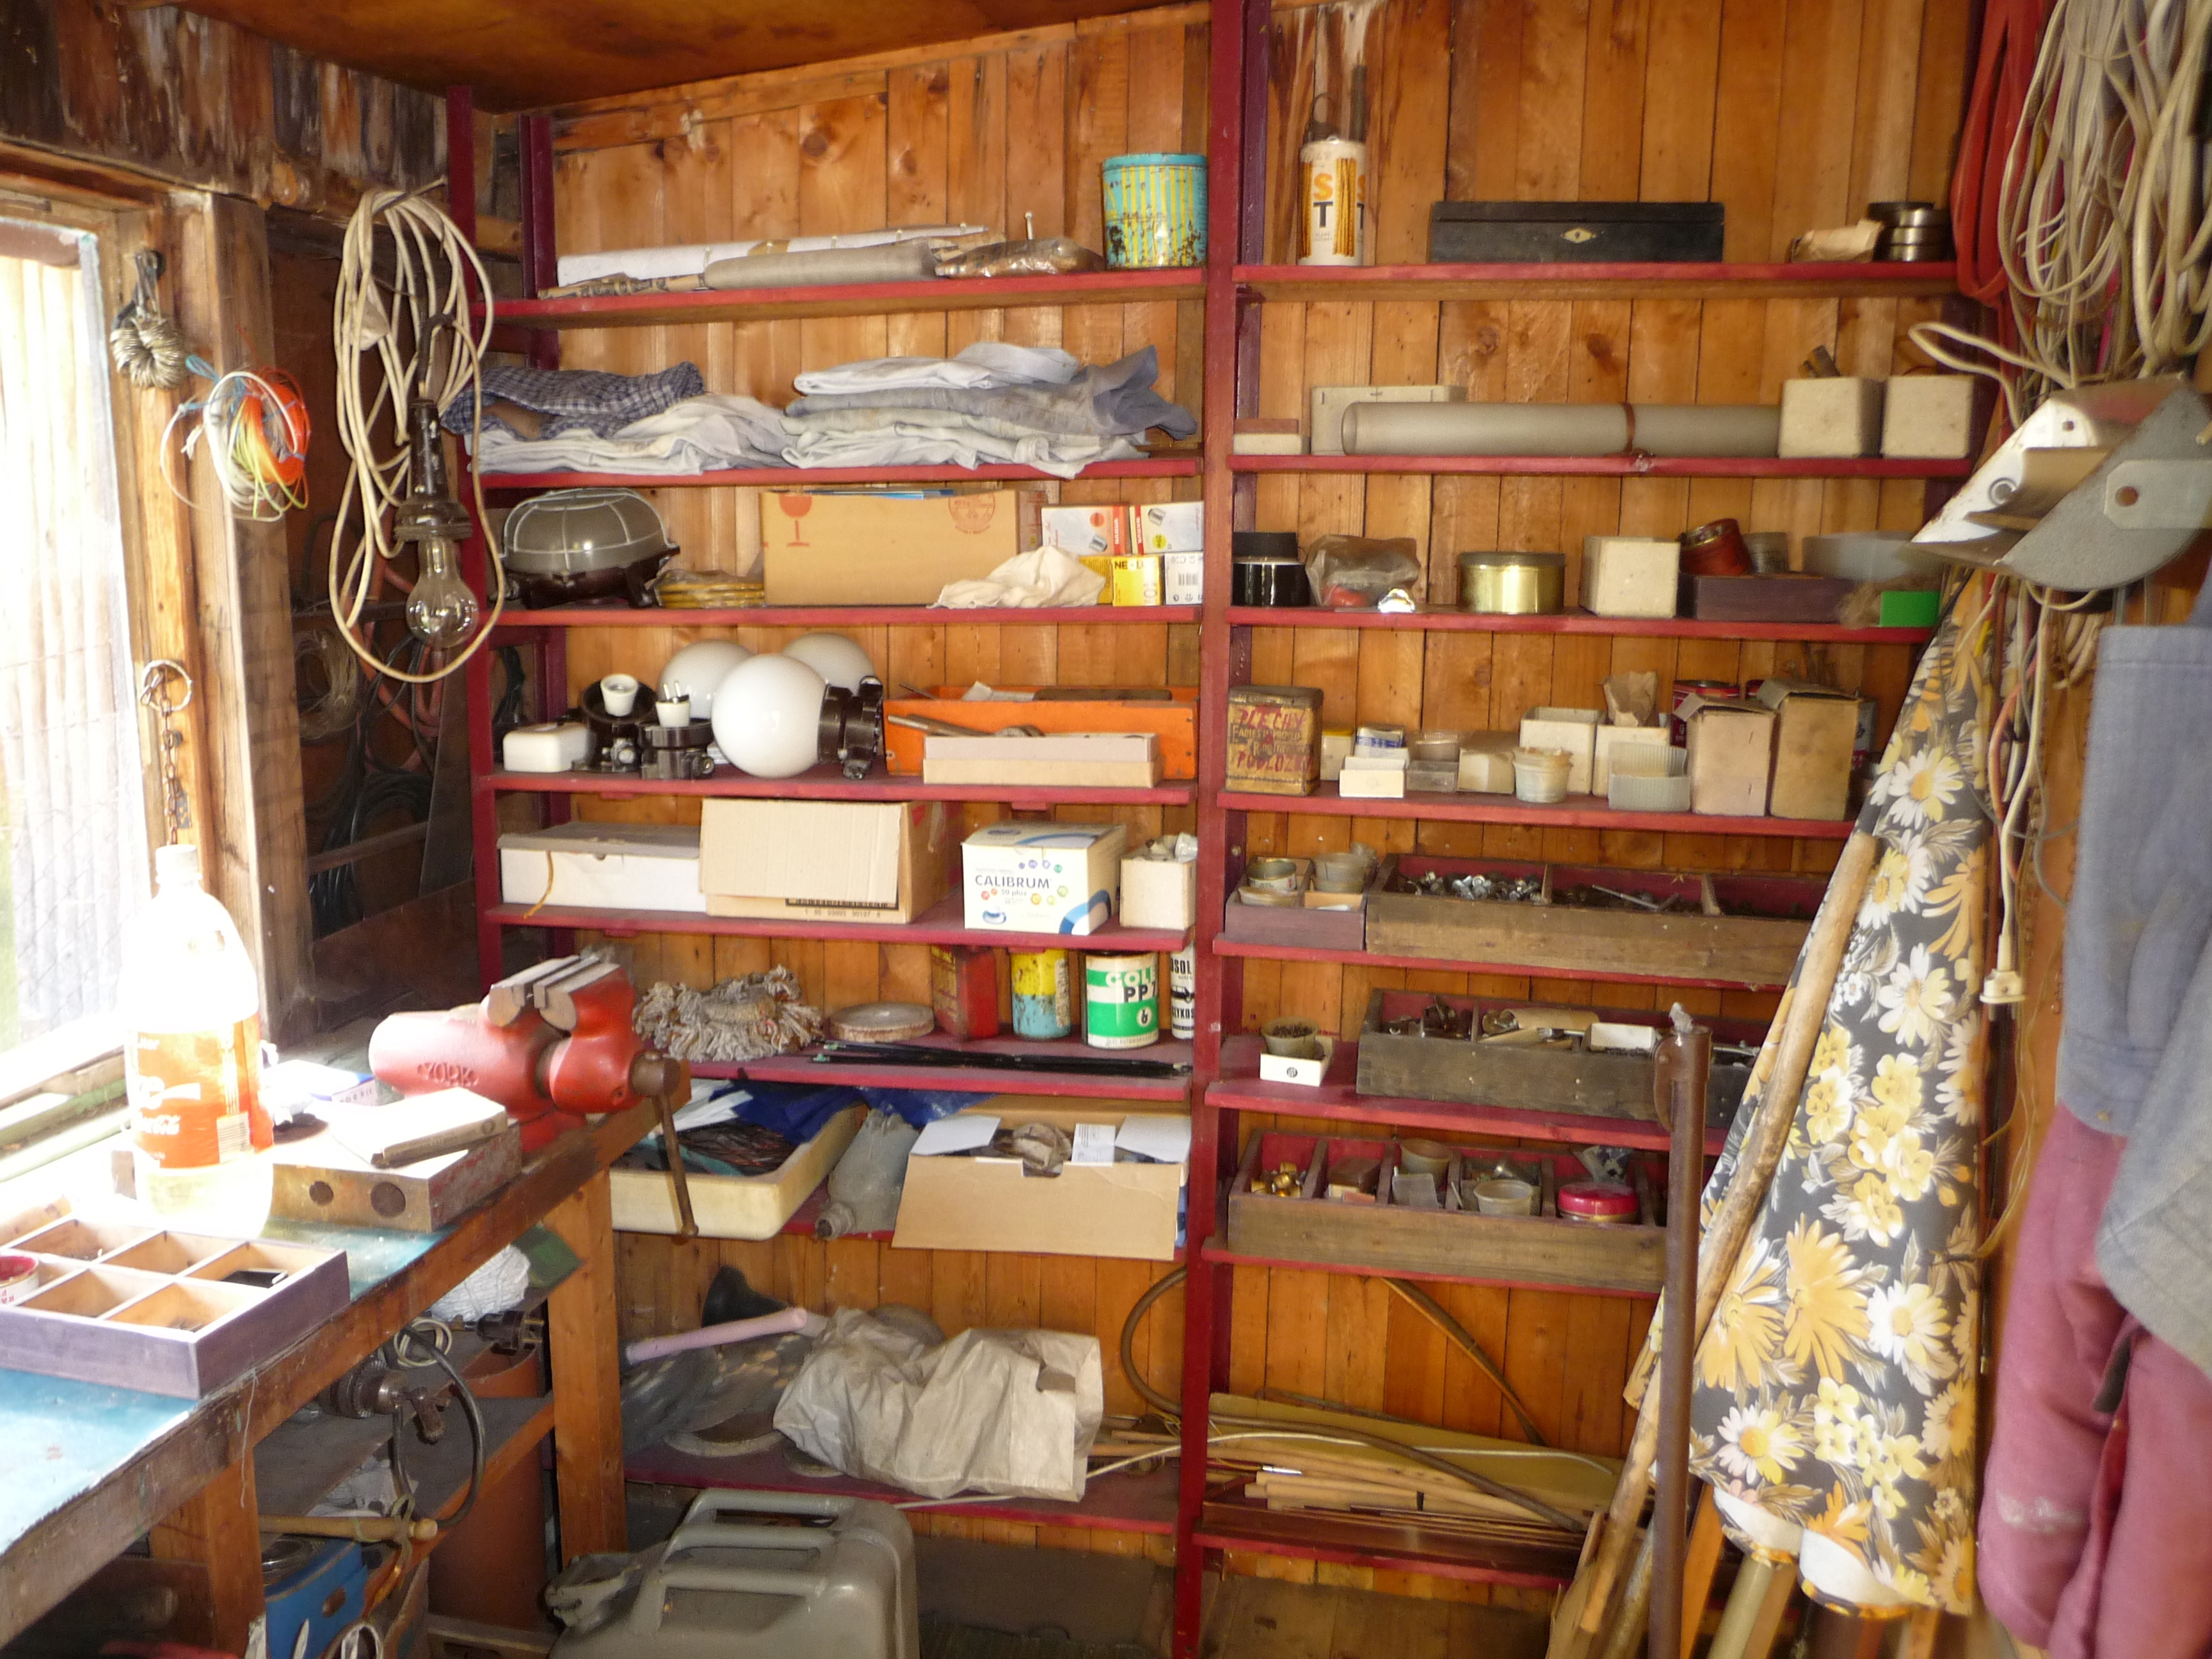 Two freestanding shelving units inside a shed